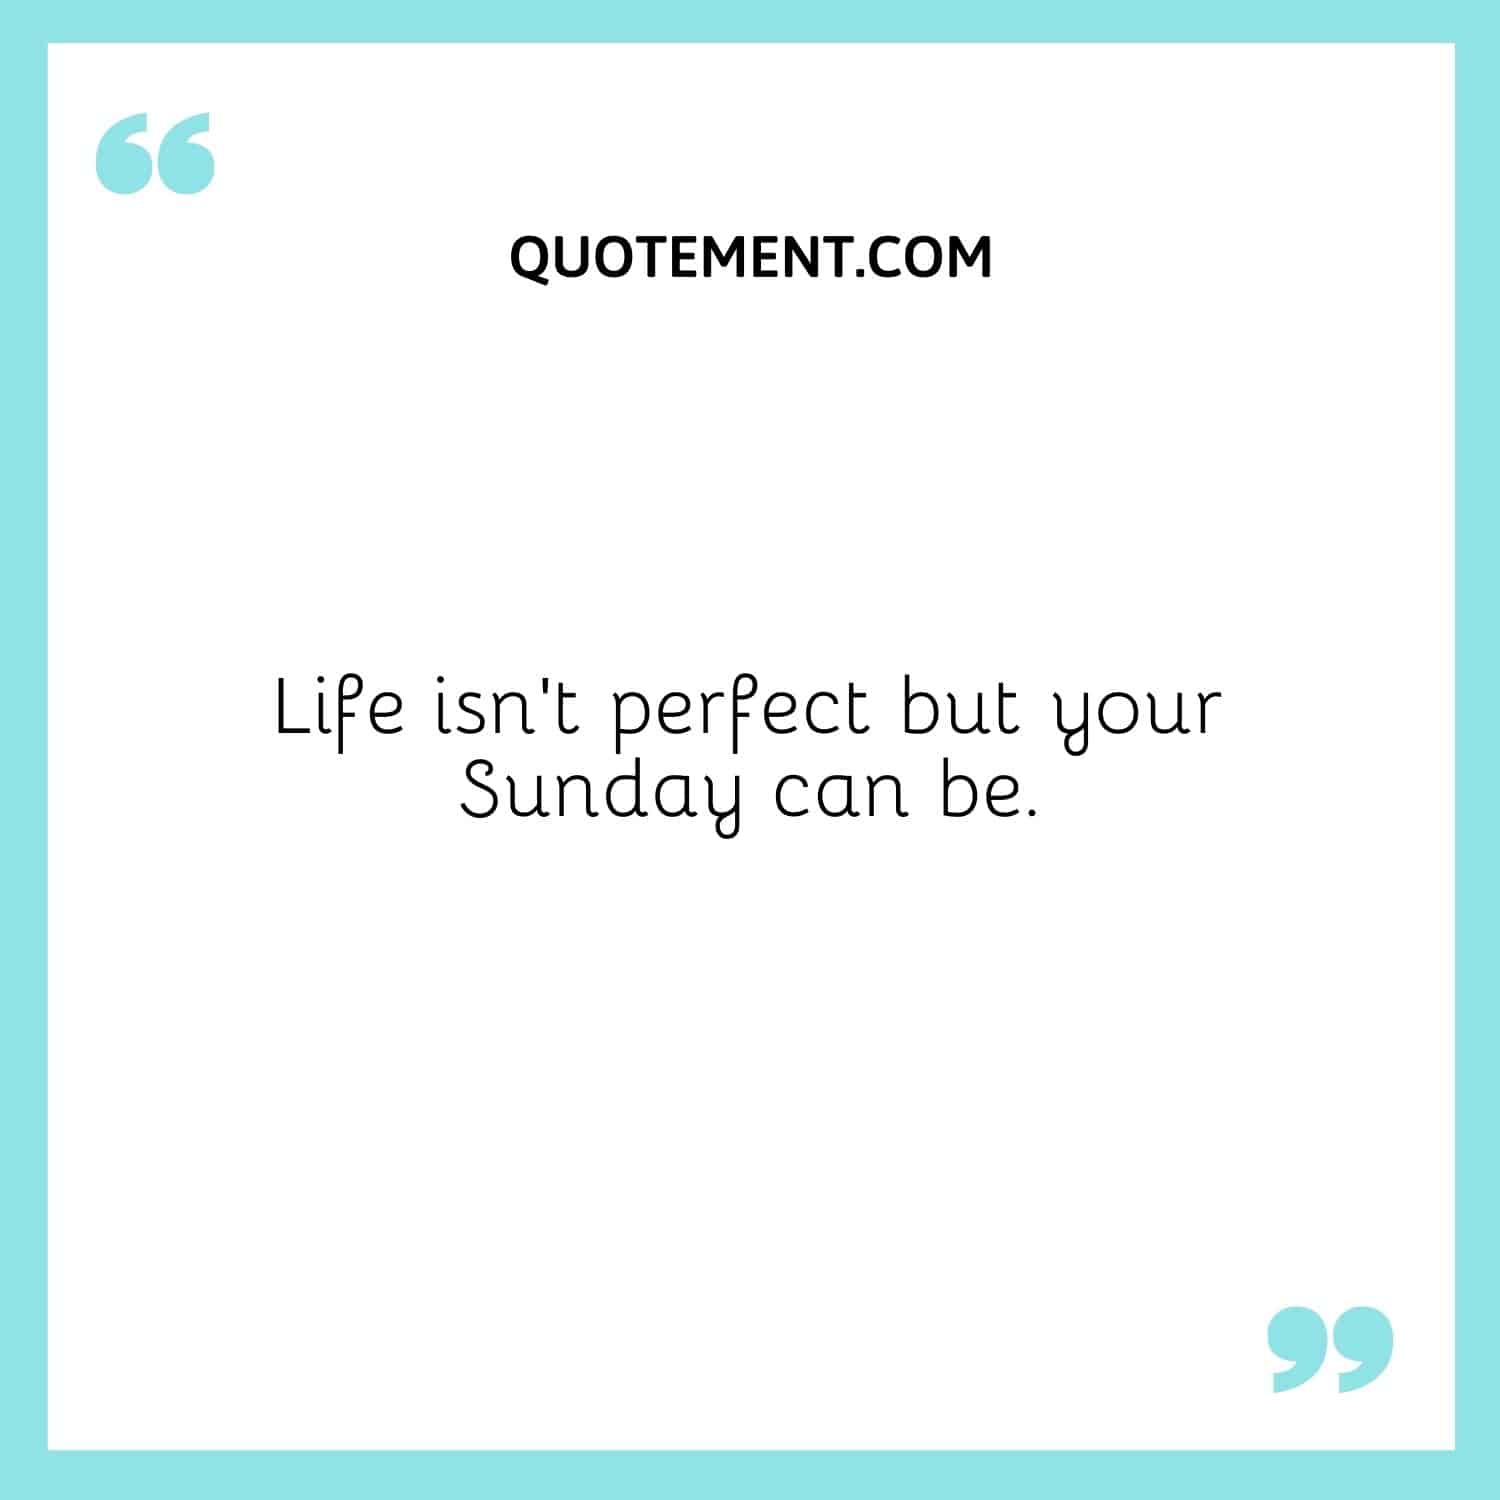 Life isn’t perfect but your Sunday can be.